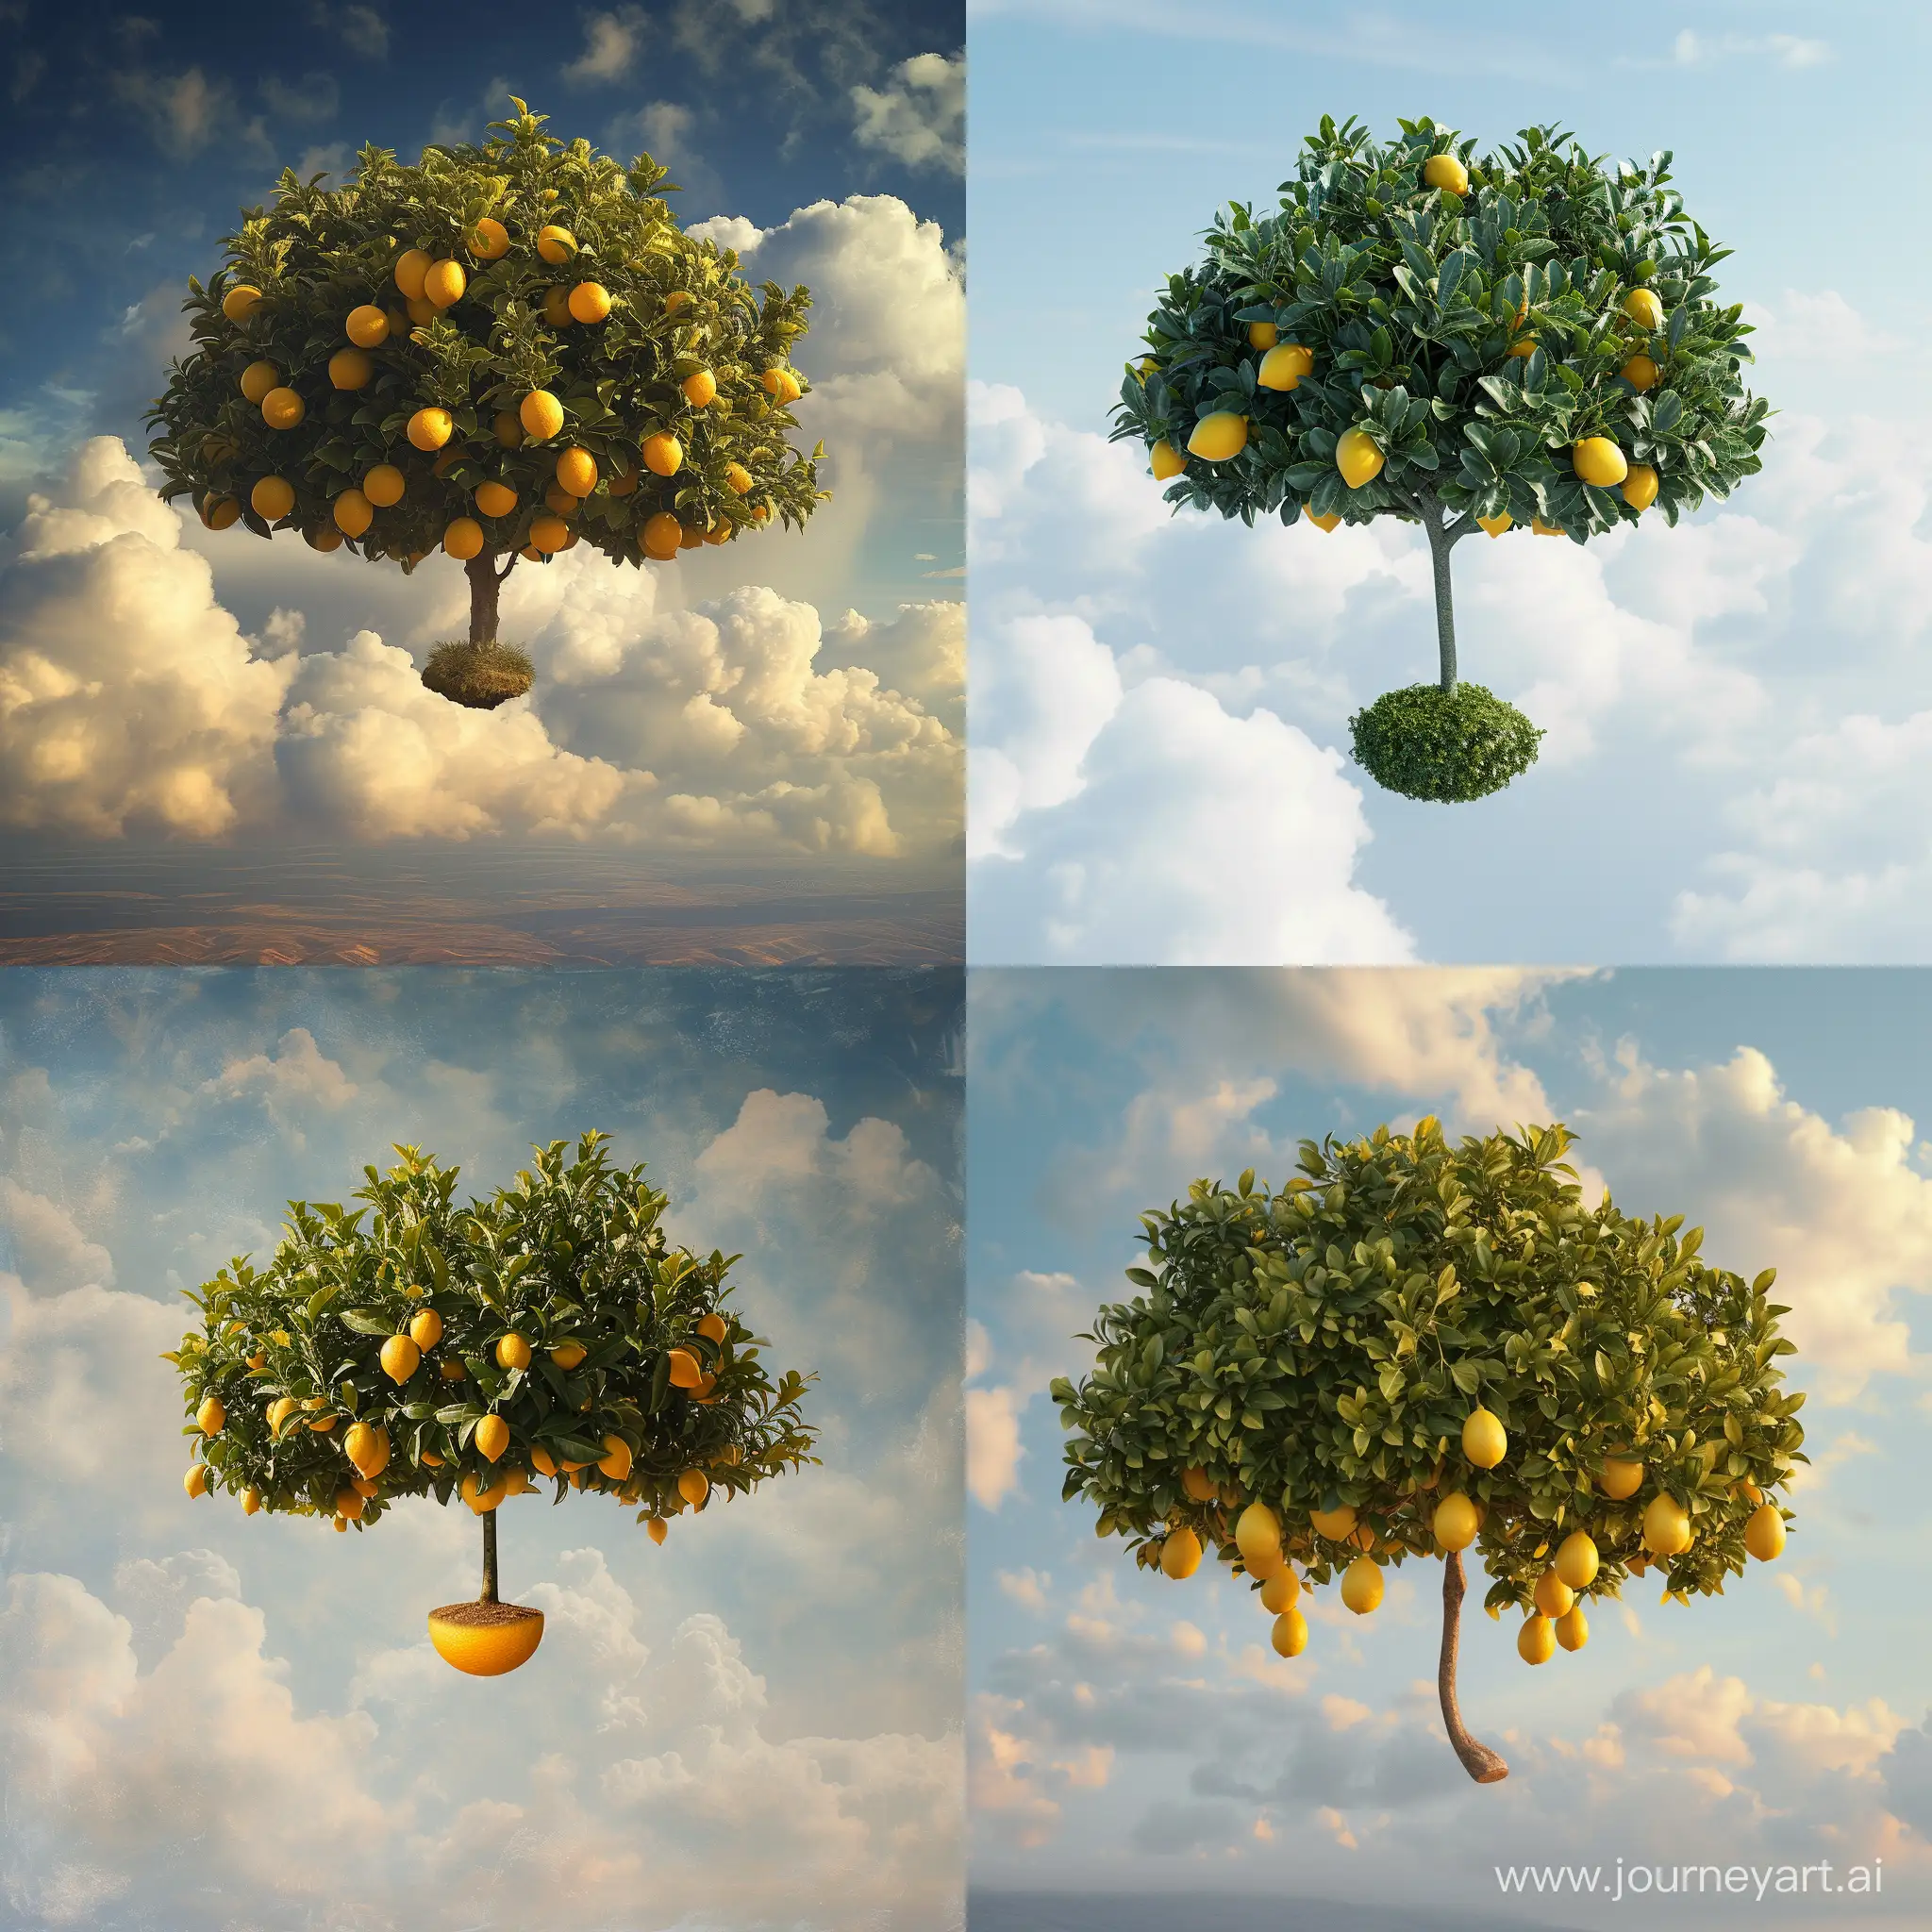 Vibrant-Lemon-Tree-Suspended-in-the-Air